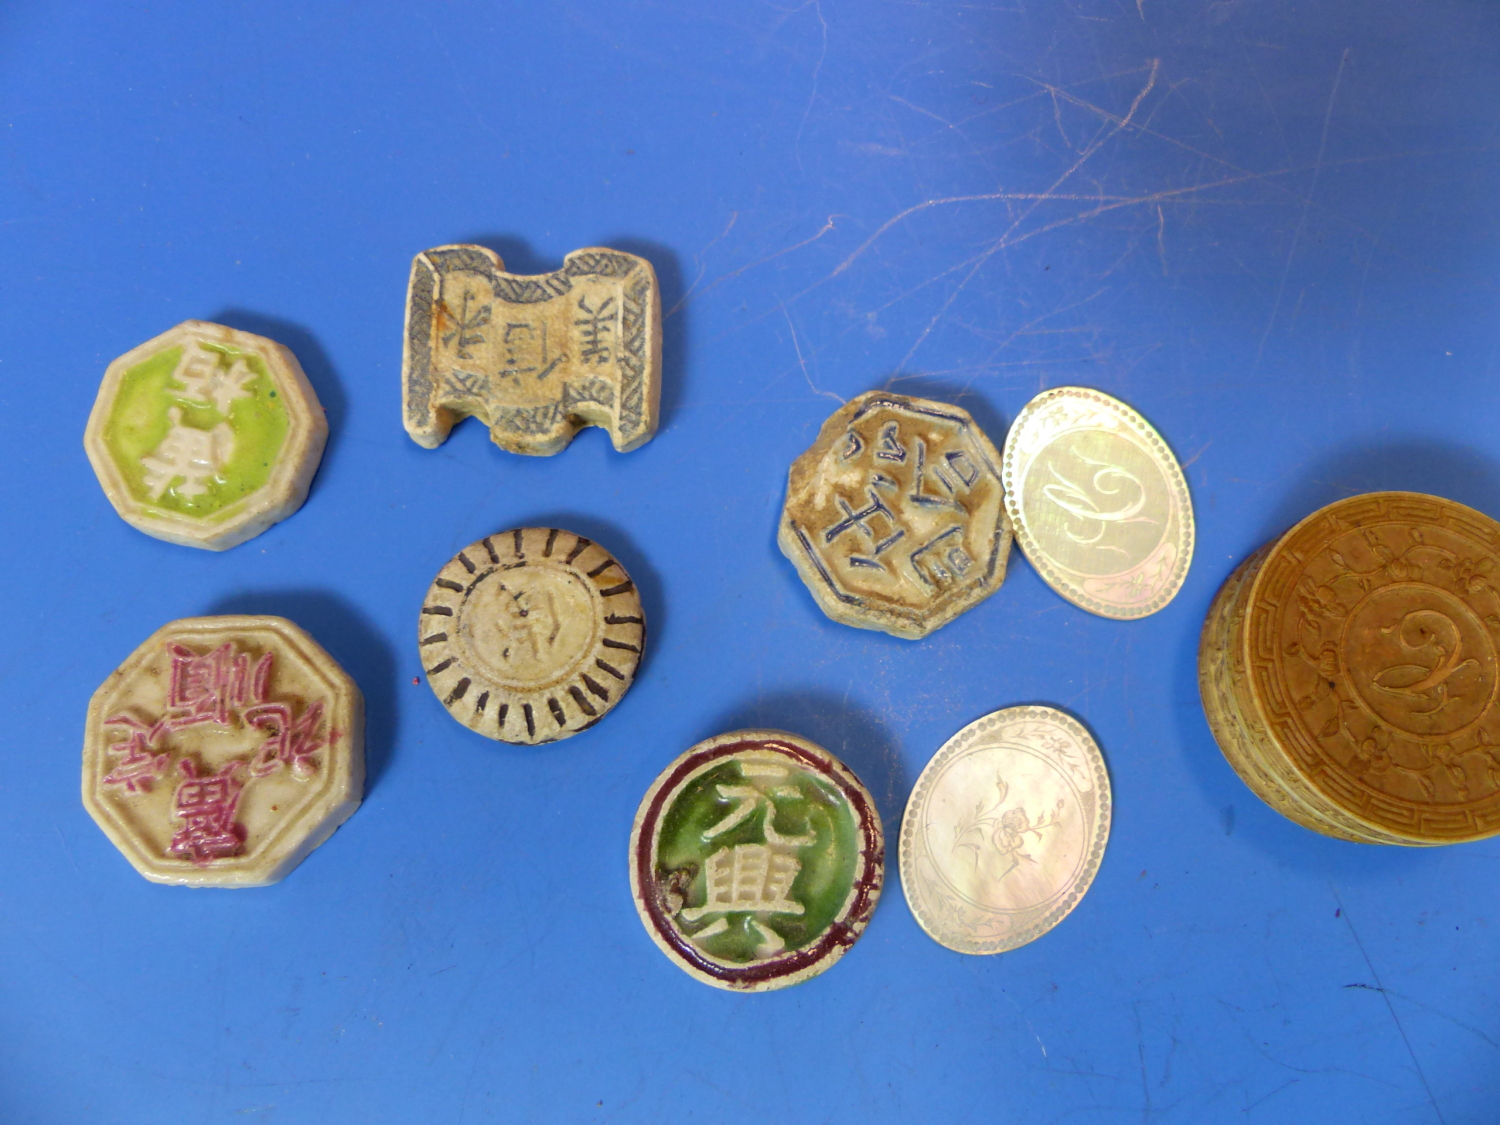 SIX CHINESE PORCELAIN GAMBLING TOKENS TOGETHER WITH MOTHER OF PEARL COUNTERS INITIALLED C, SOME